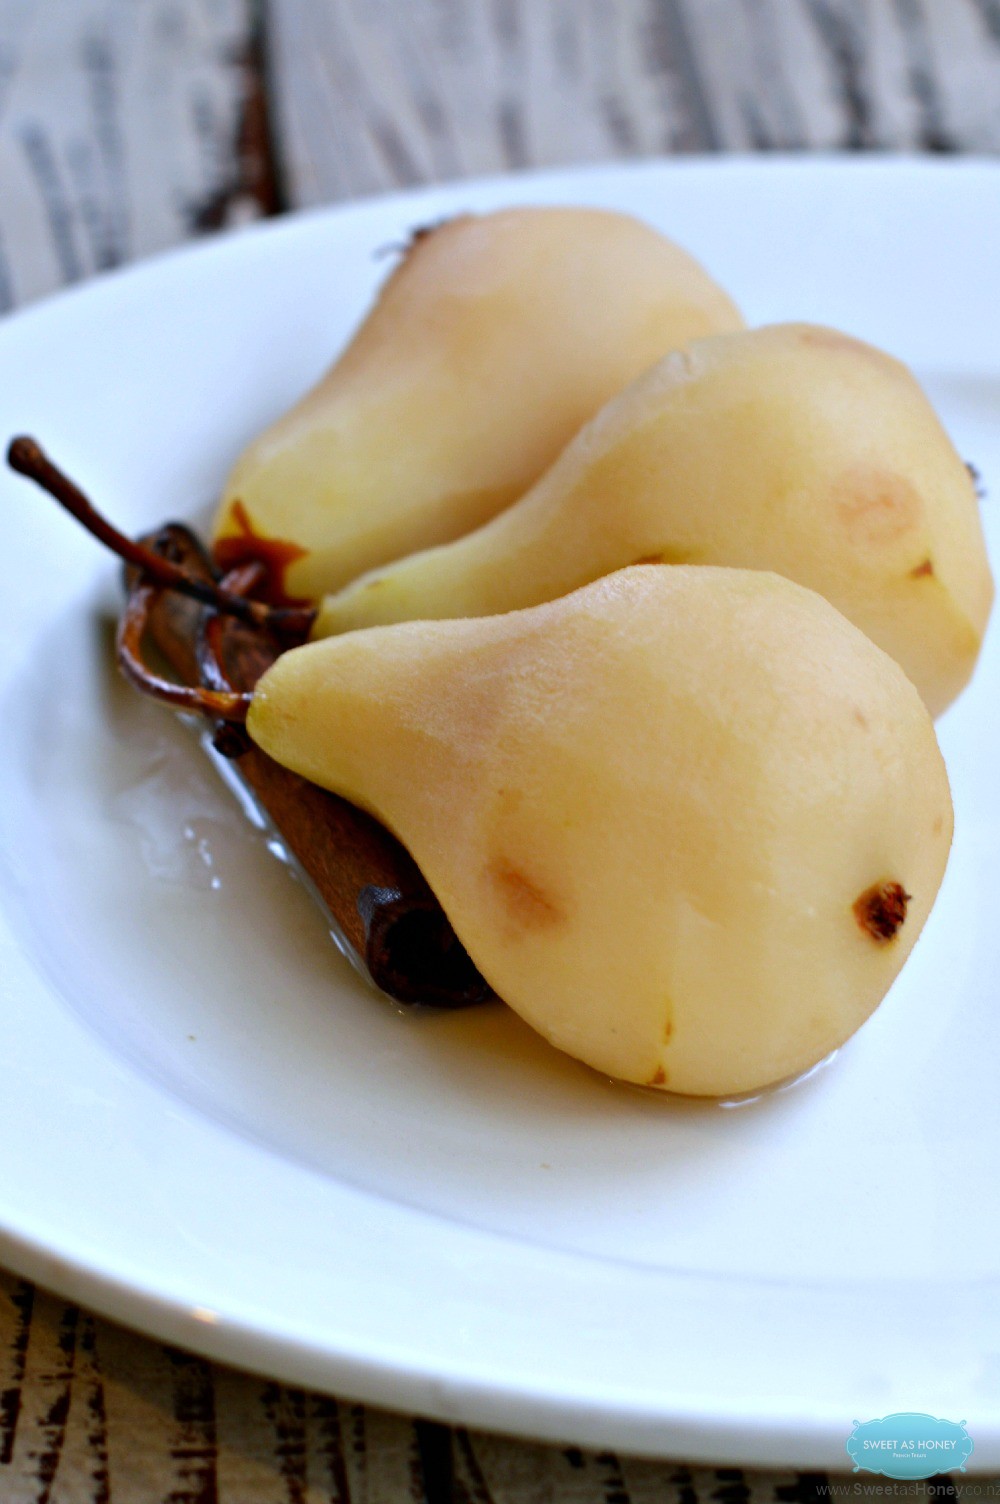 How do you cook pears?